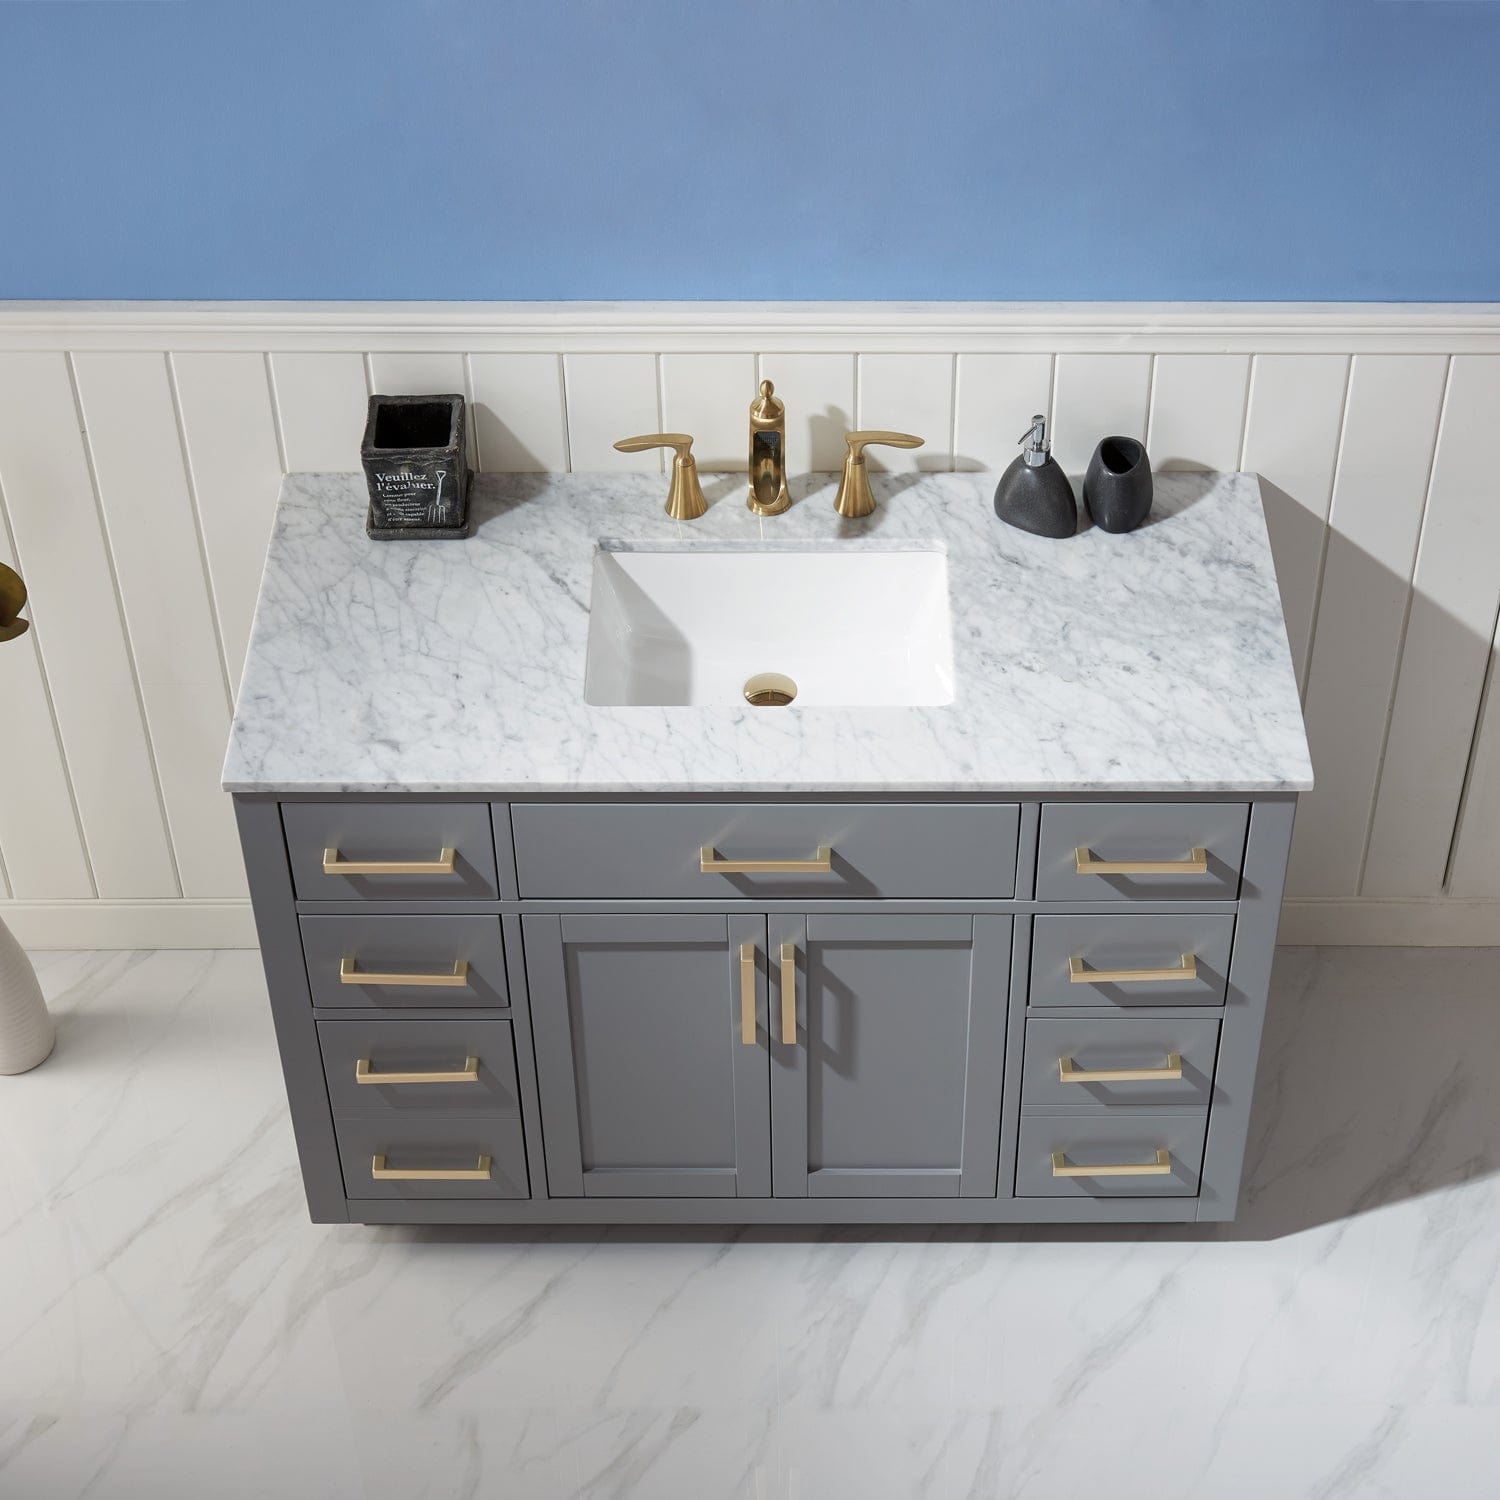 Altair Ivy 48" Single Bathroom Vanity Set in Gray and Carrara White Marble Countertop without Mirror 531048-GR-CA-NM - Molaix631112971164Vanity531048-GR-CA-NM